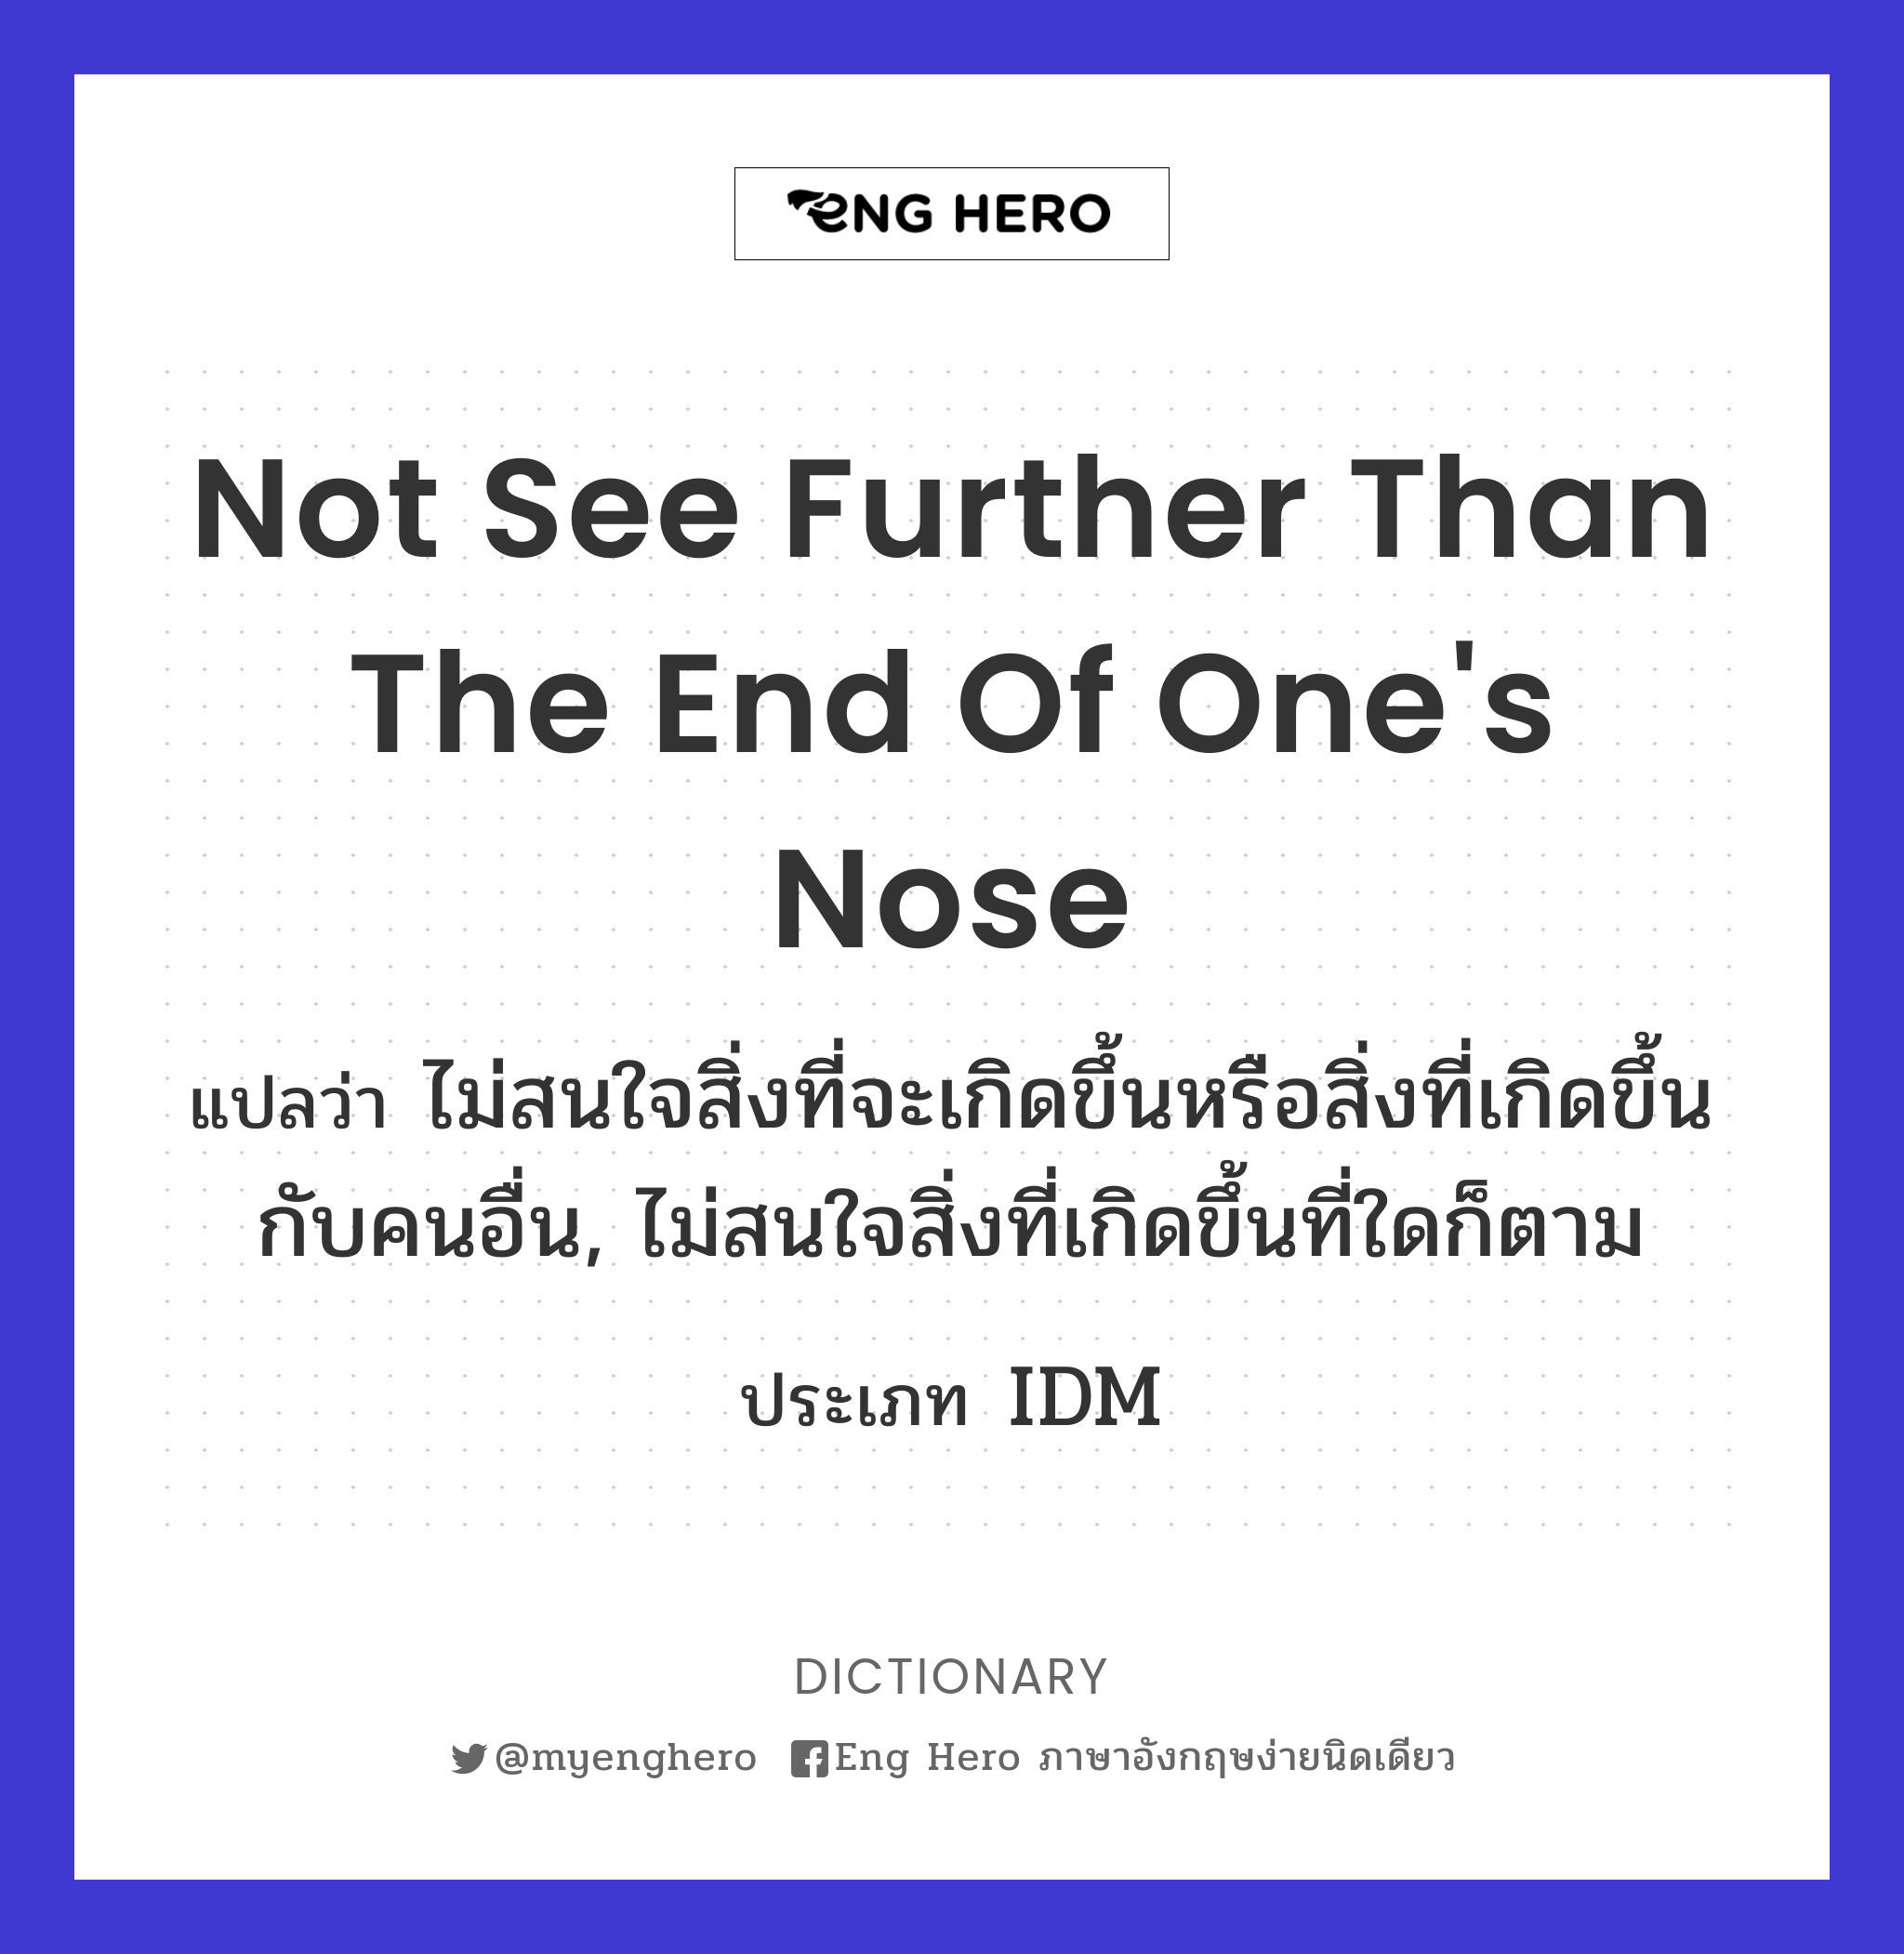 not see further than the end of one's nose